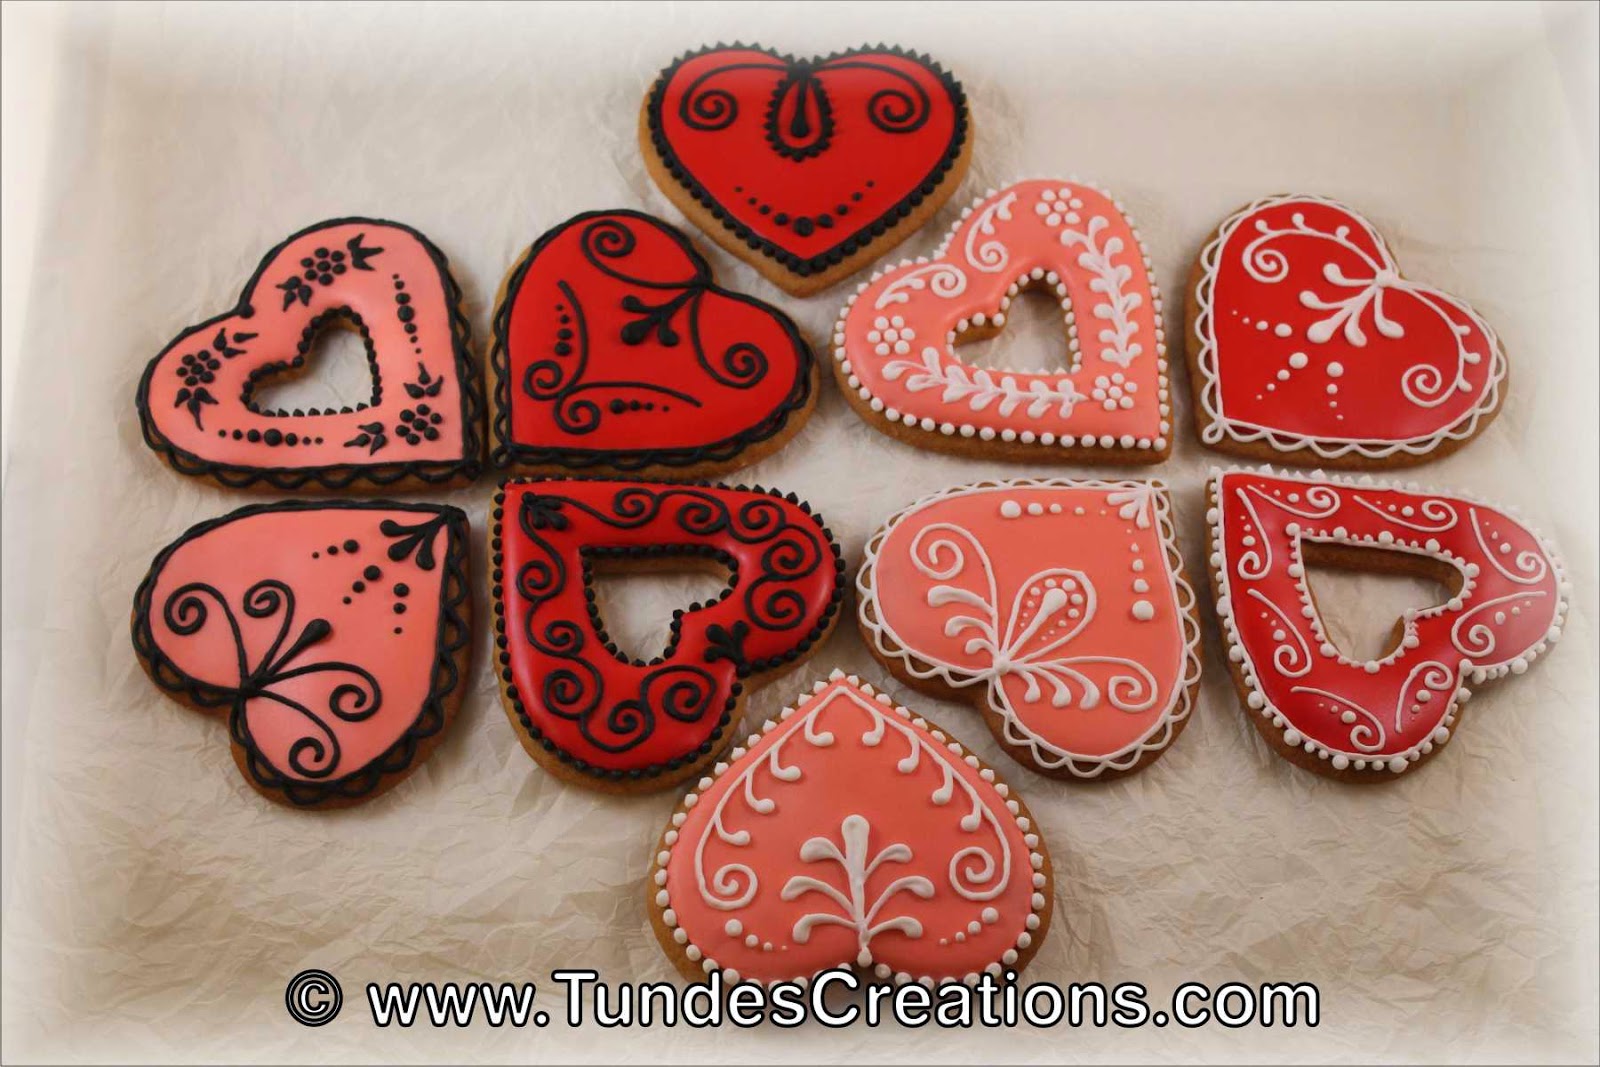 Traditional Valentine's gingerbread hearts.